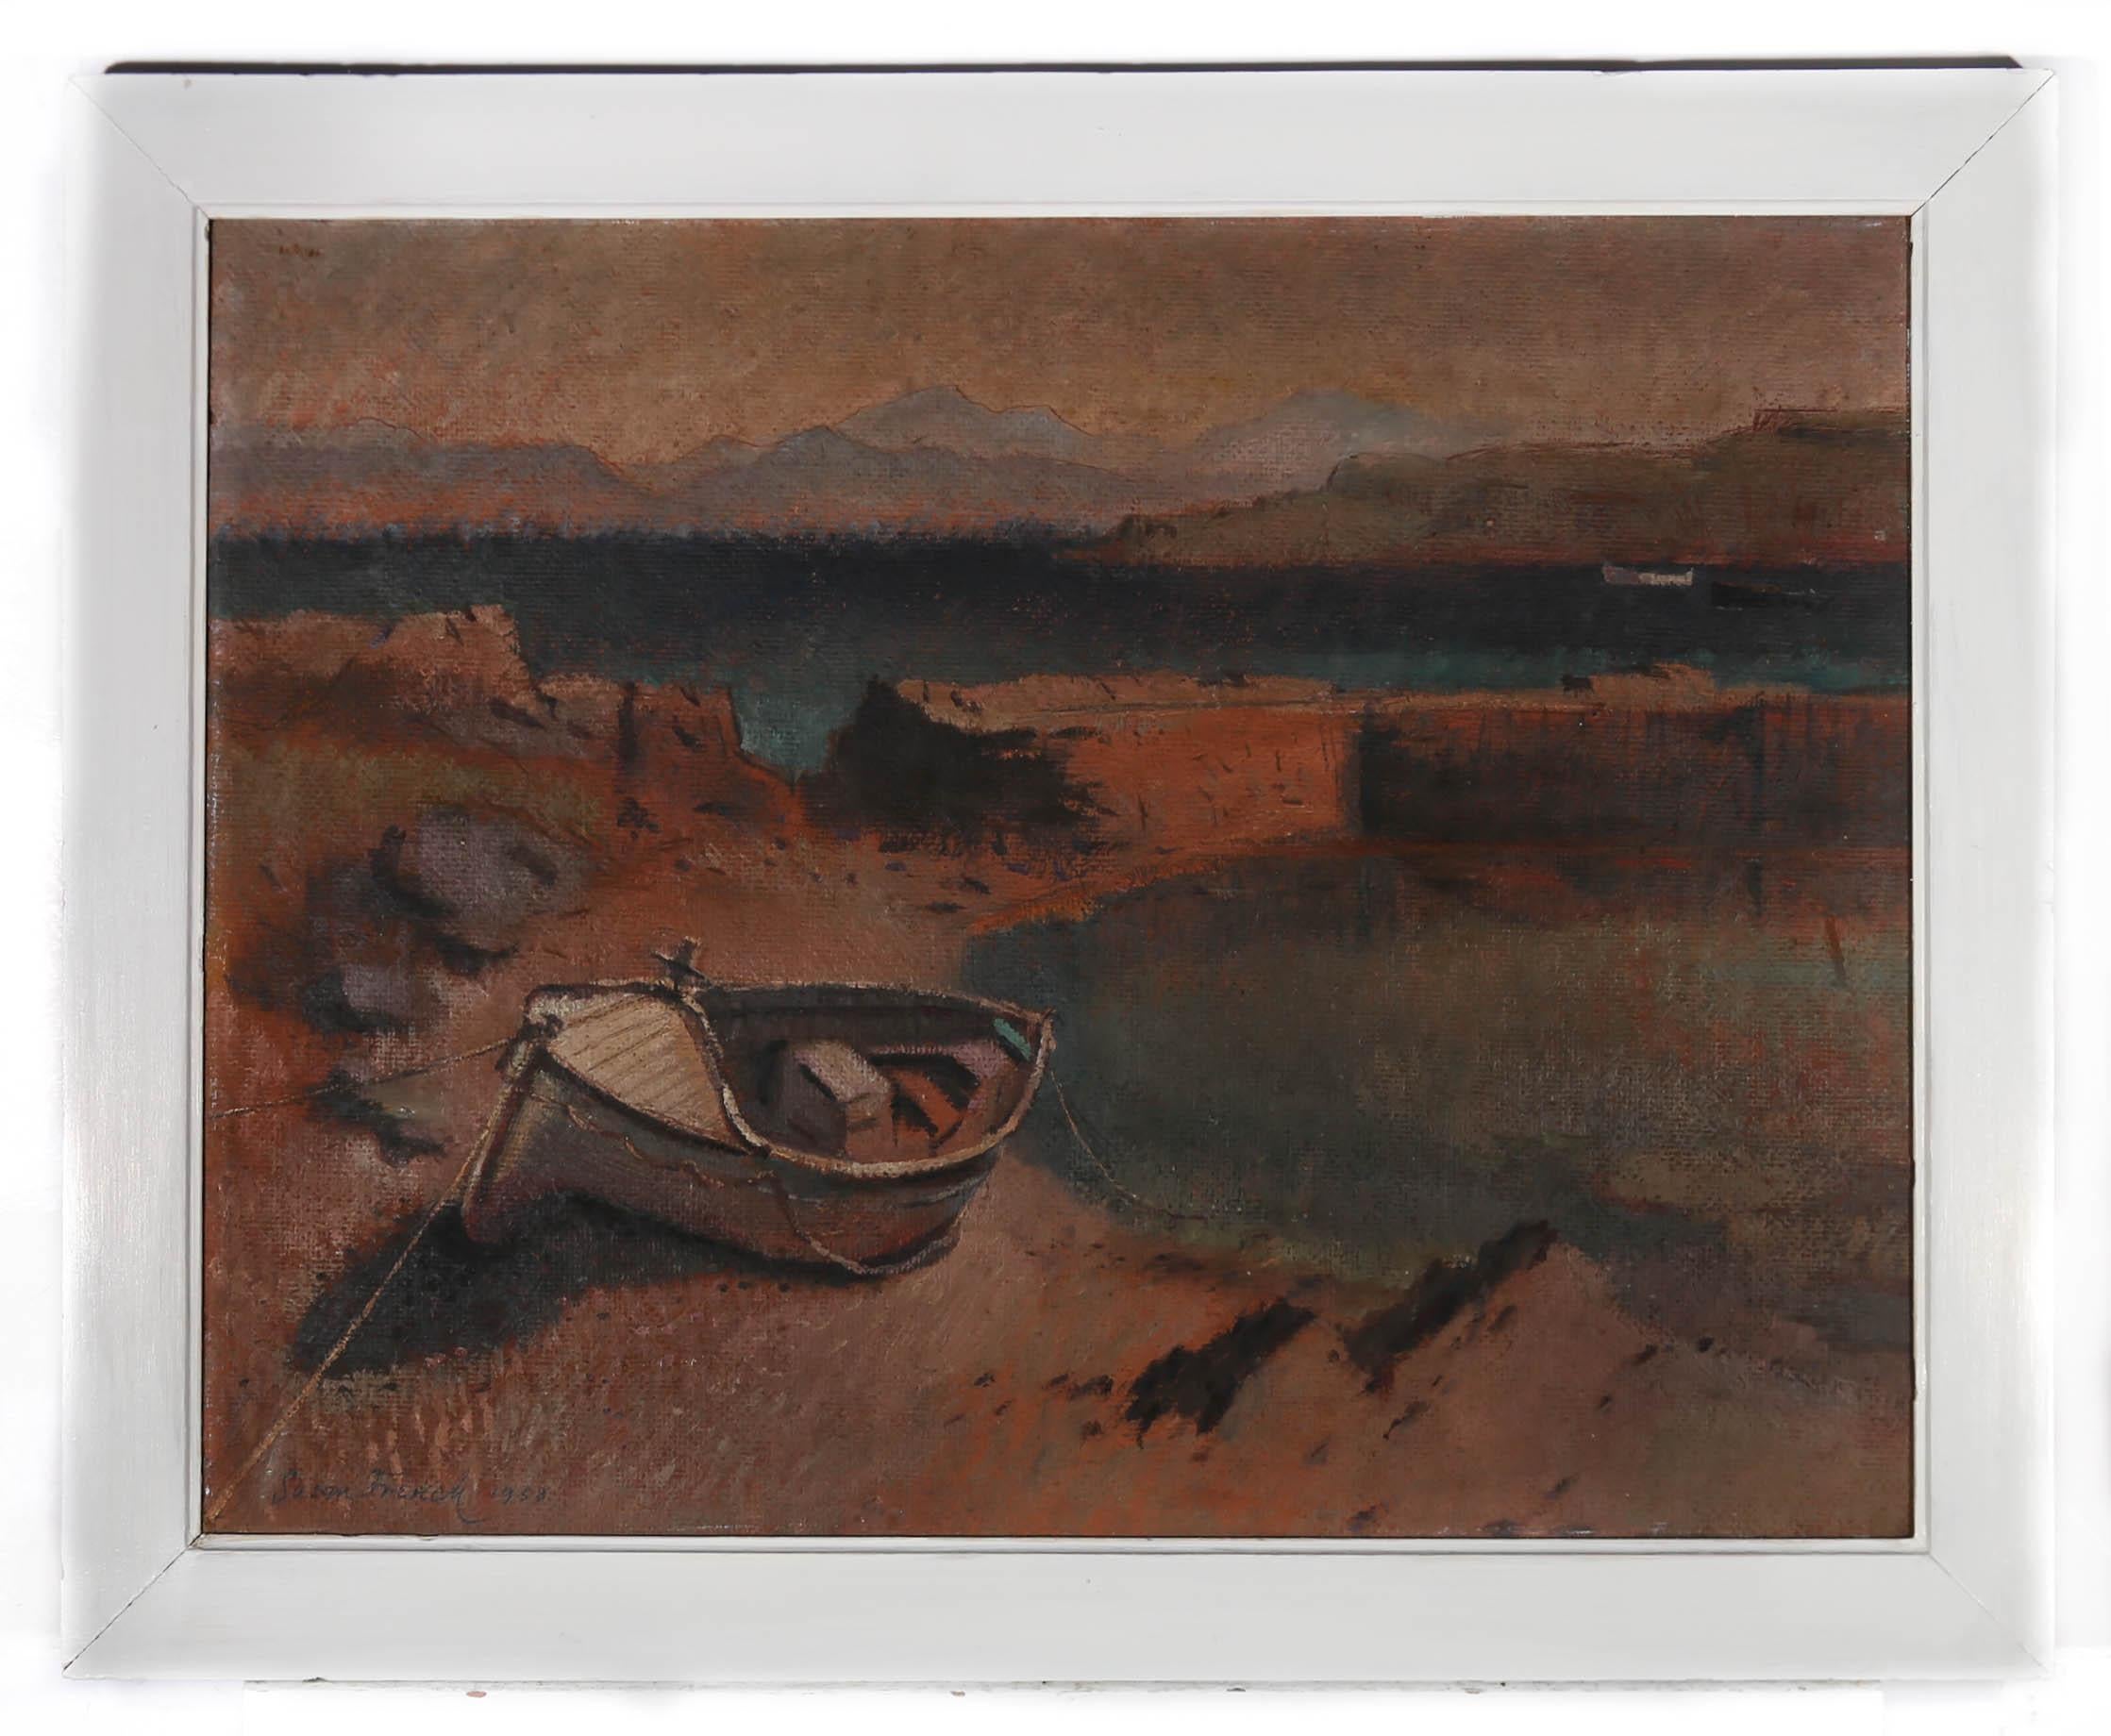 A delightful Mid 20th Century piece depicting a beached fishing boat in a small bay. Across the water the artist shows a mountainous landscape in simple forms. The foreground is captured in a warmer colour palette, with shadows cast behind the